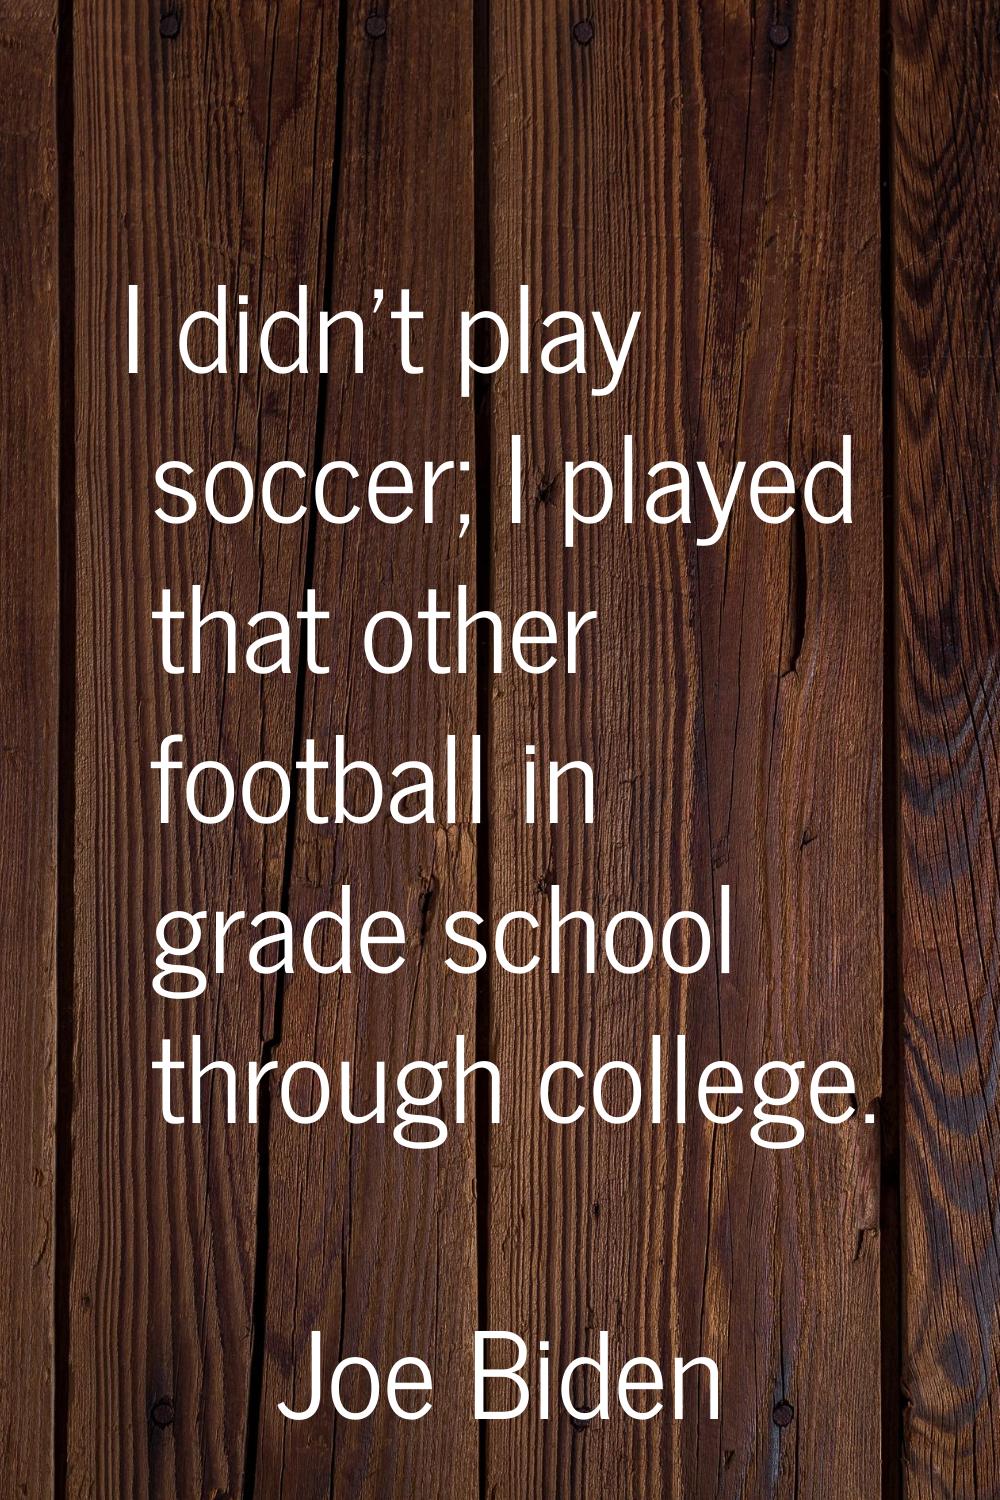 I didn't play soccer; I played that other football in grade school through college.